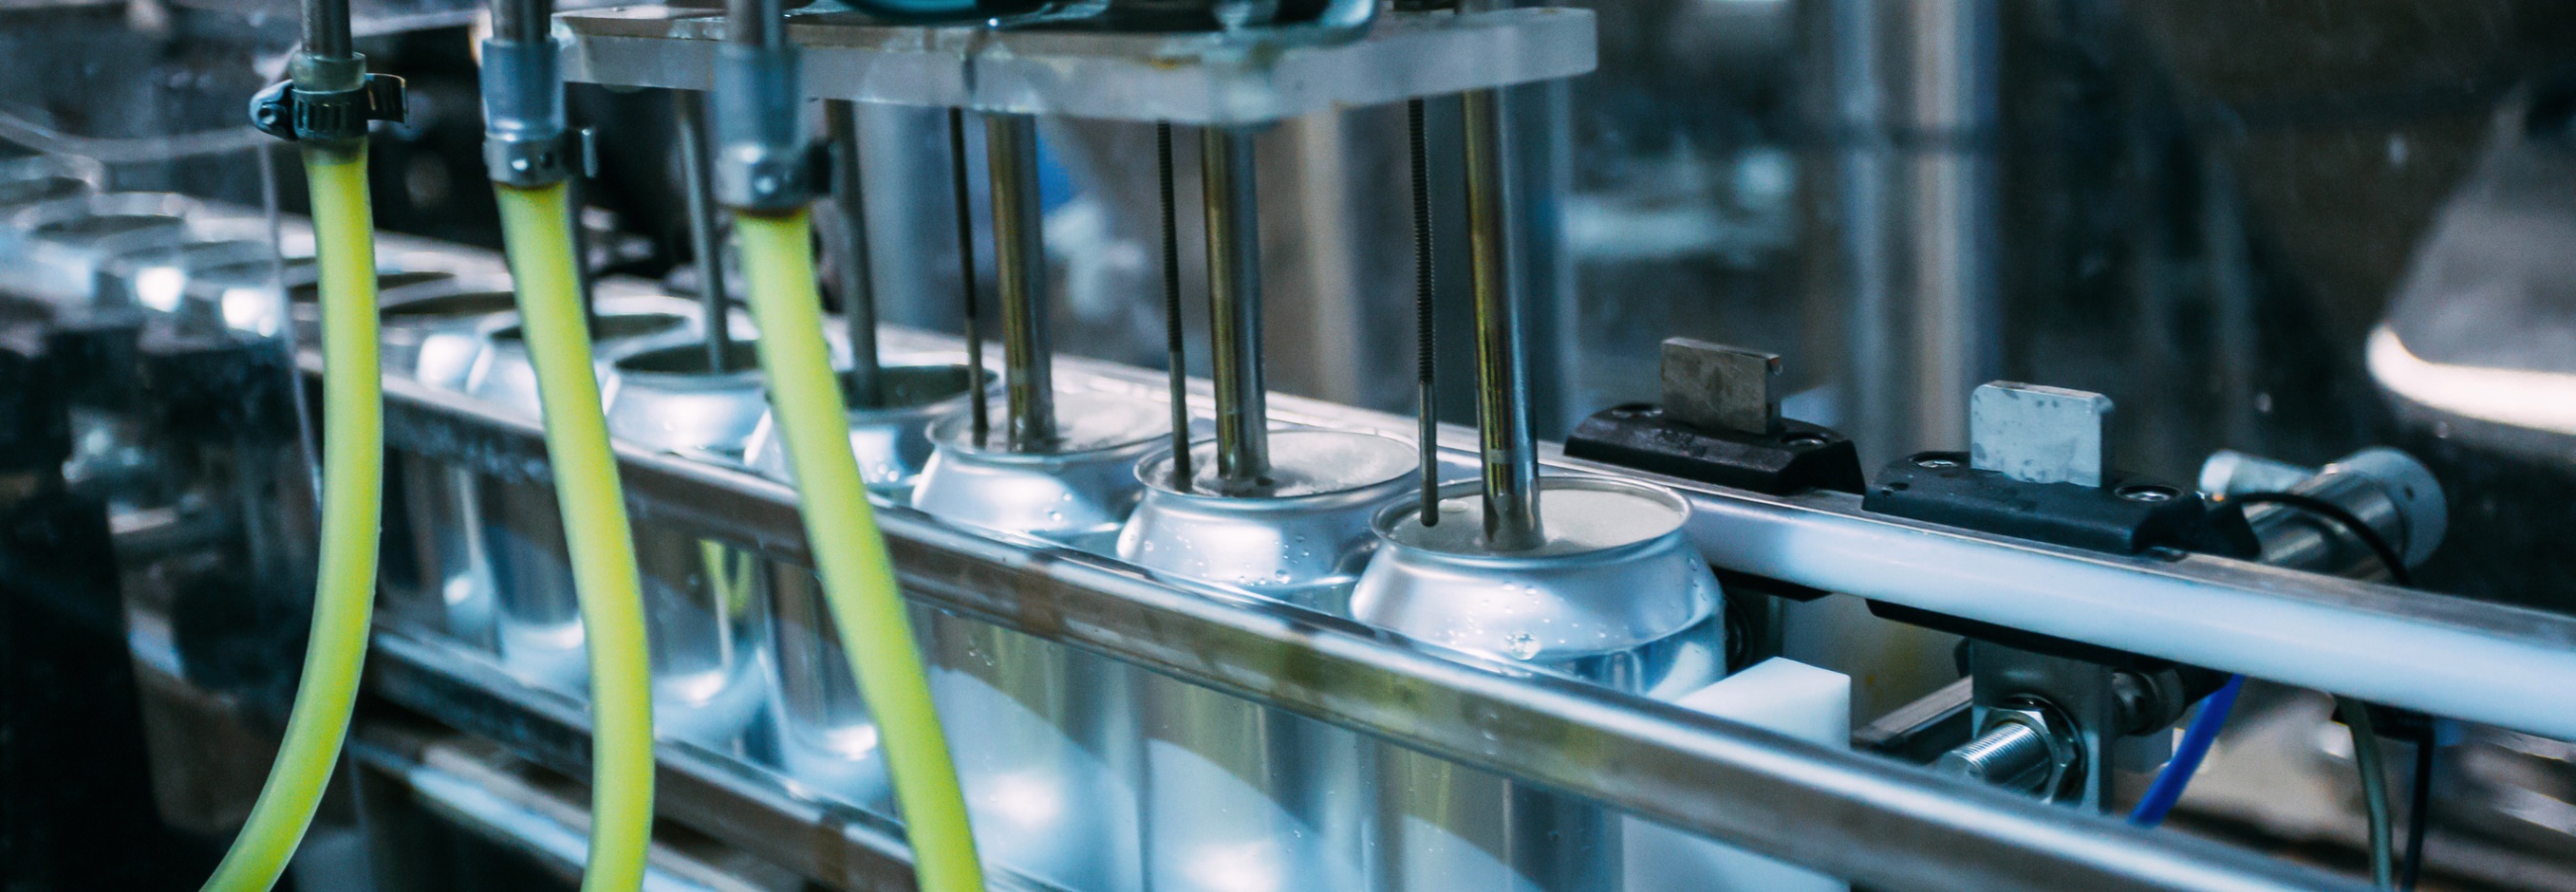 Small-Scale Pilot Beverage Production Solutions